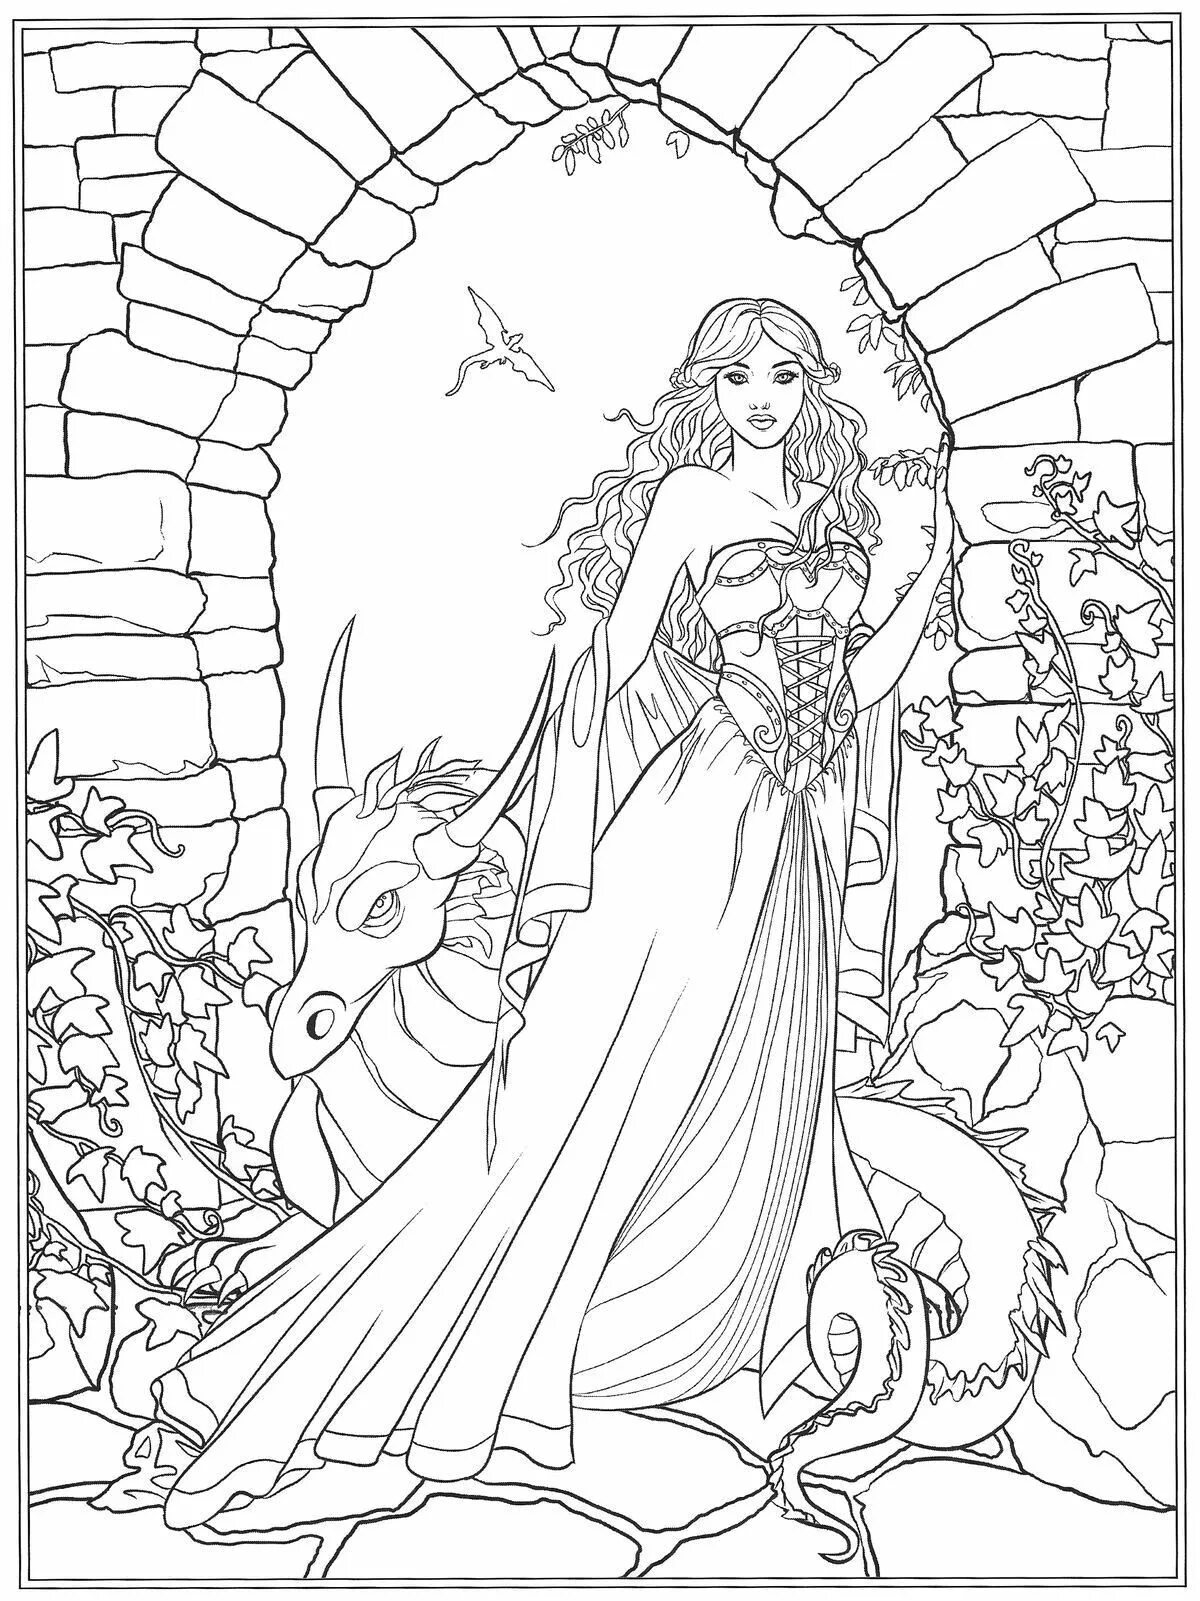 Gorgeous fantasy girl coloring page